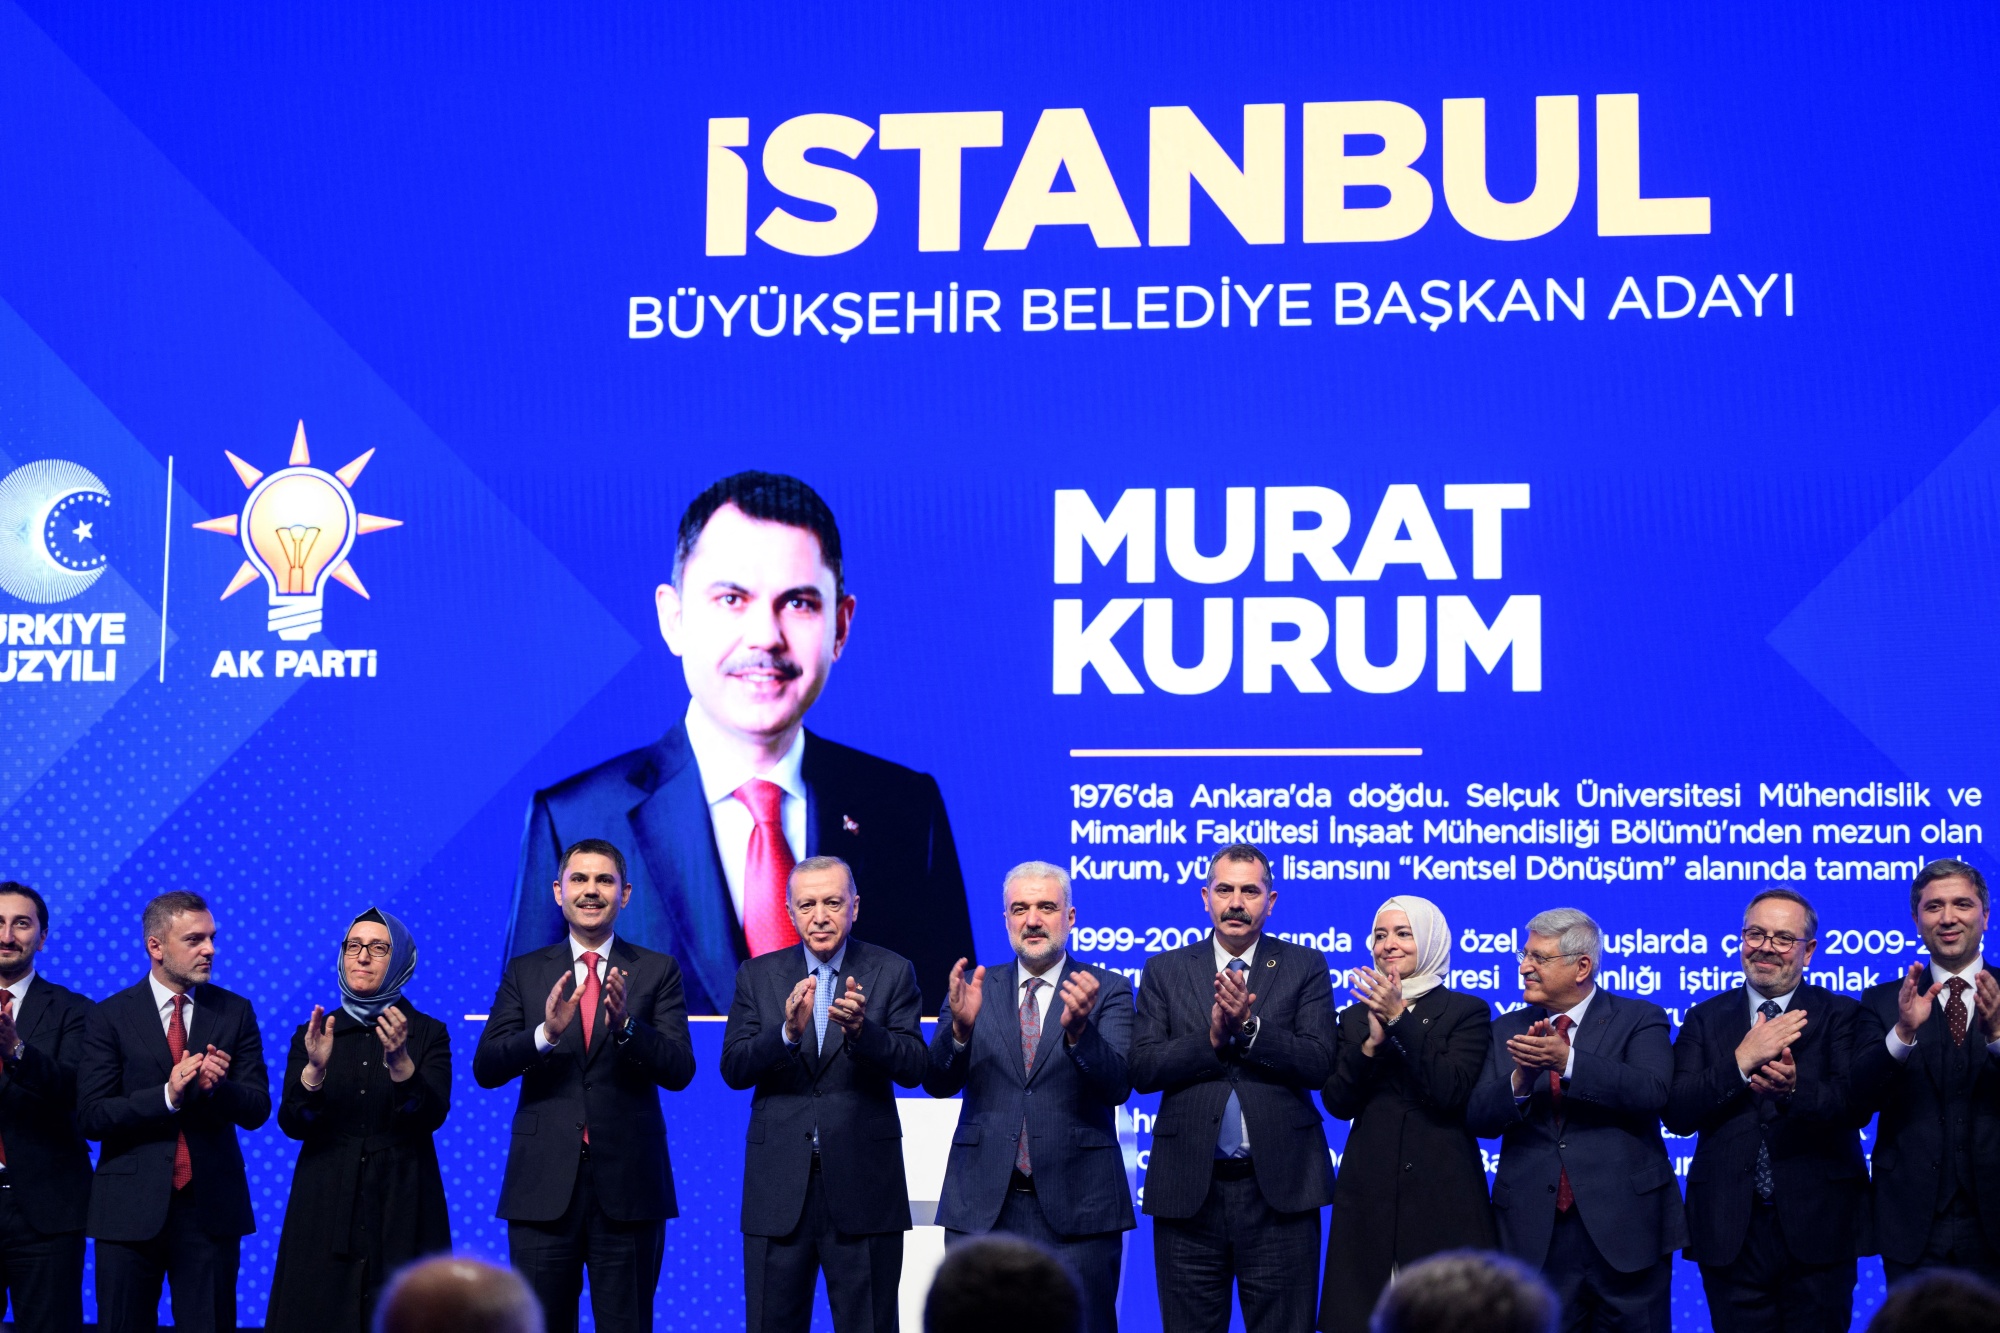 Erdogan names ex-minister as Istanbul mayor candidate